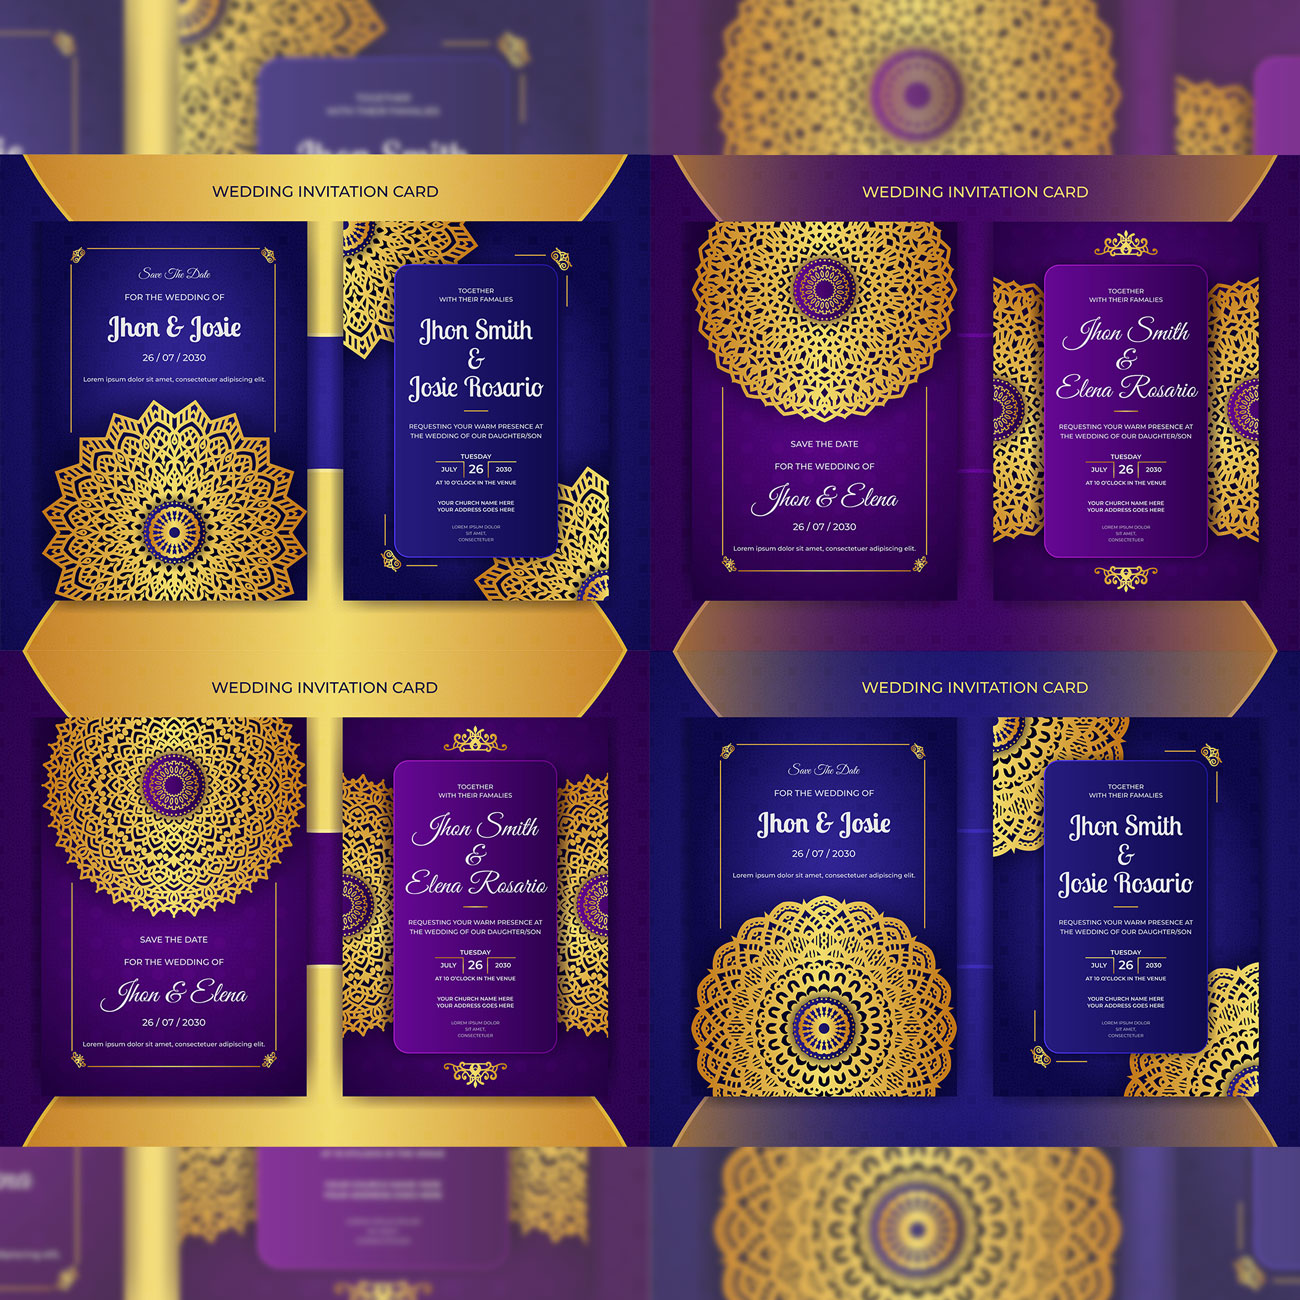 4 In One Luxury Colorful Wedding Invitation Card Only In $7 preview image.